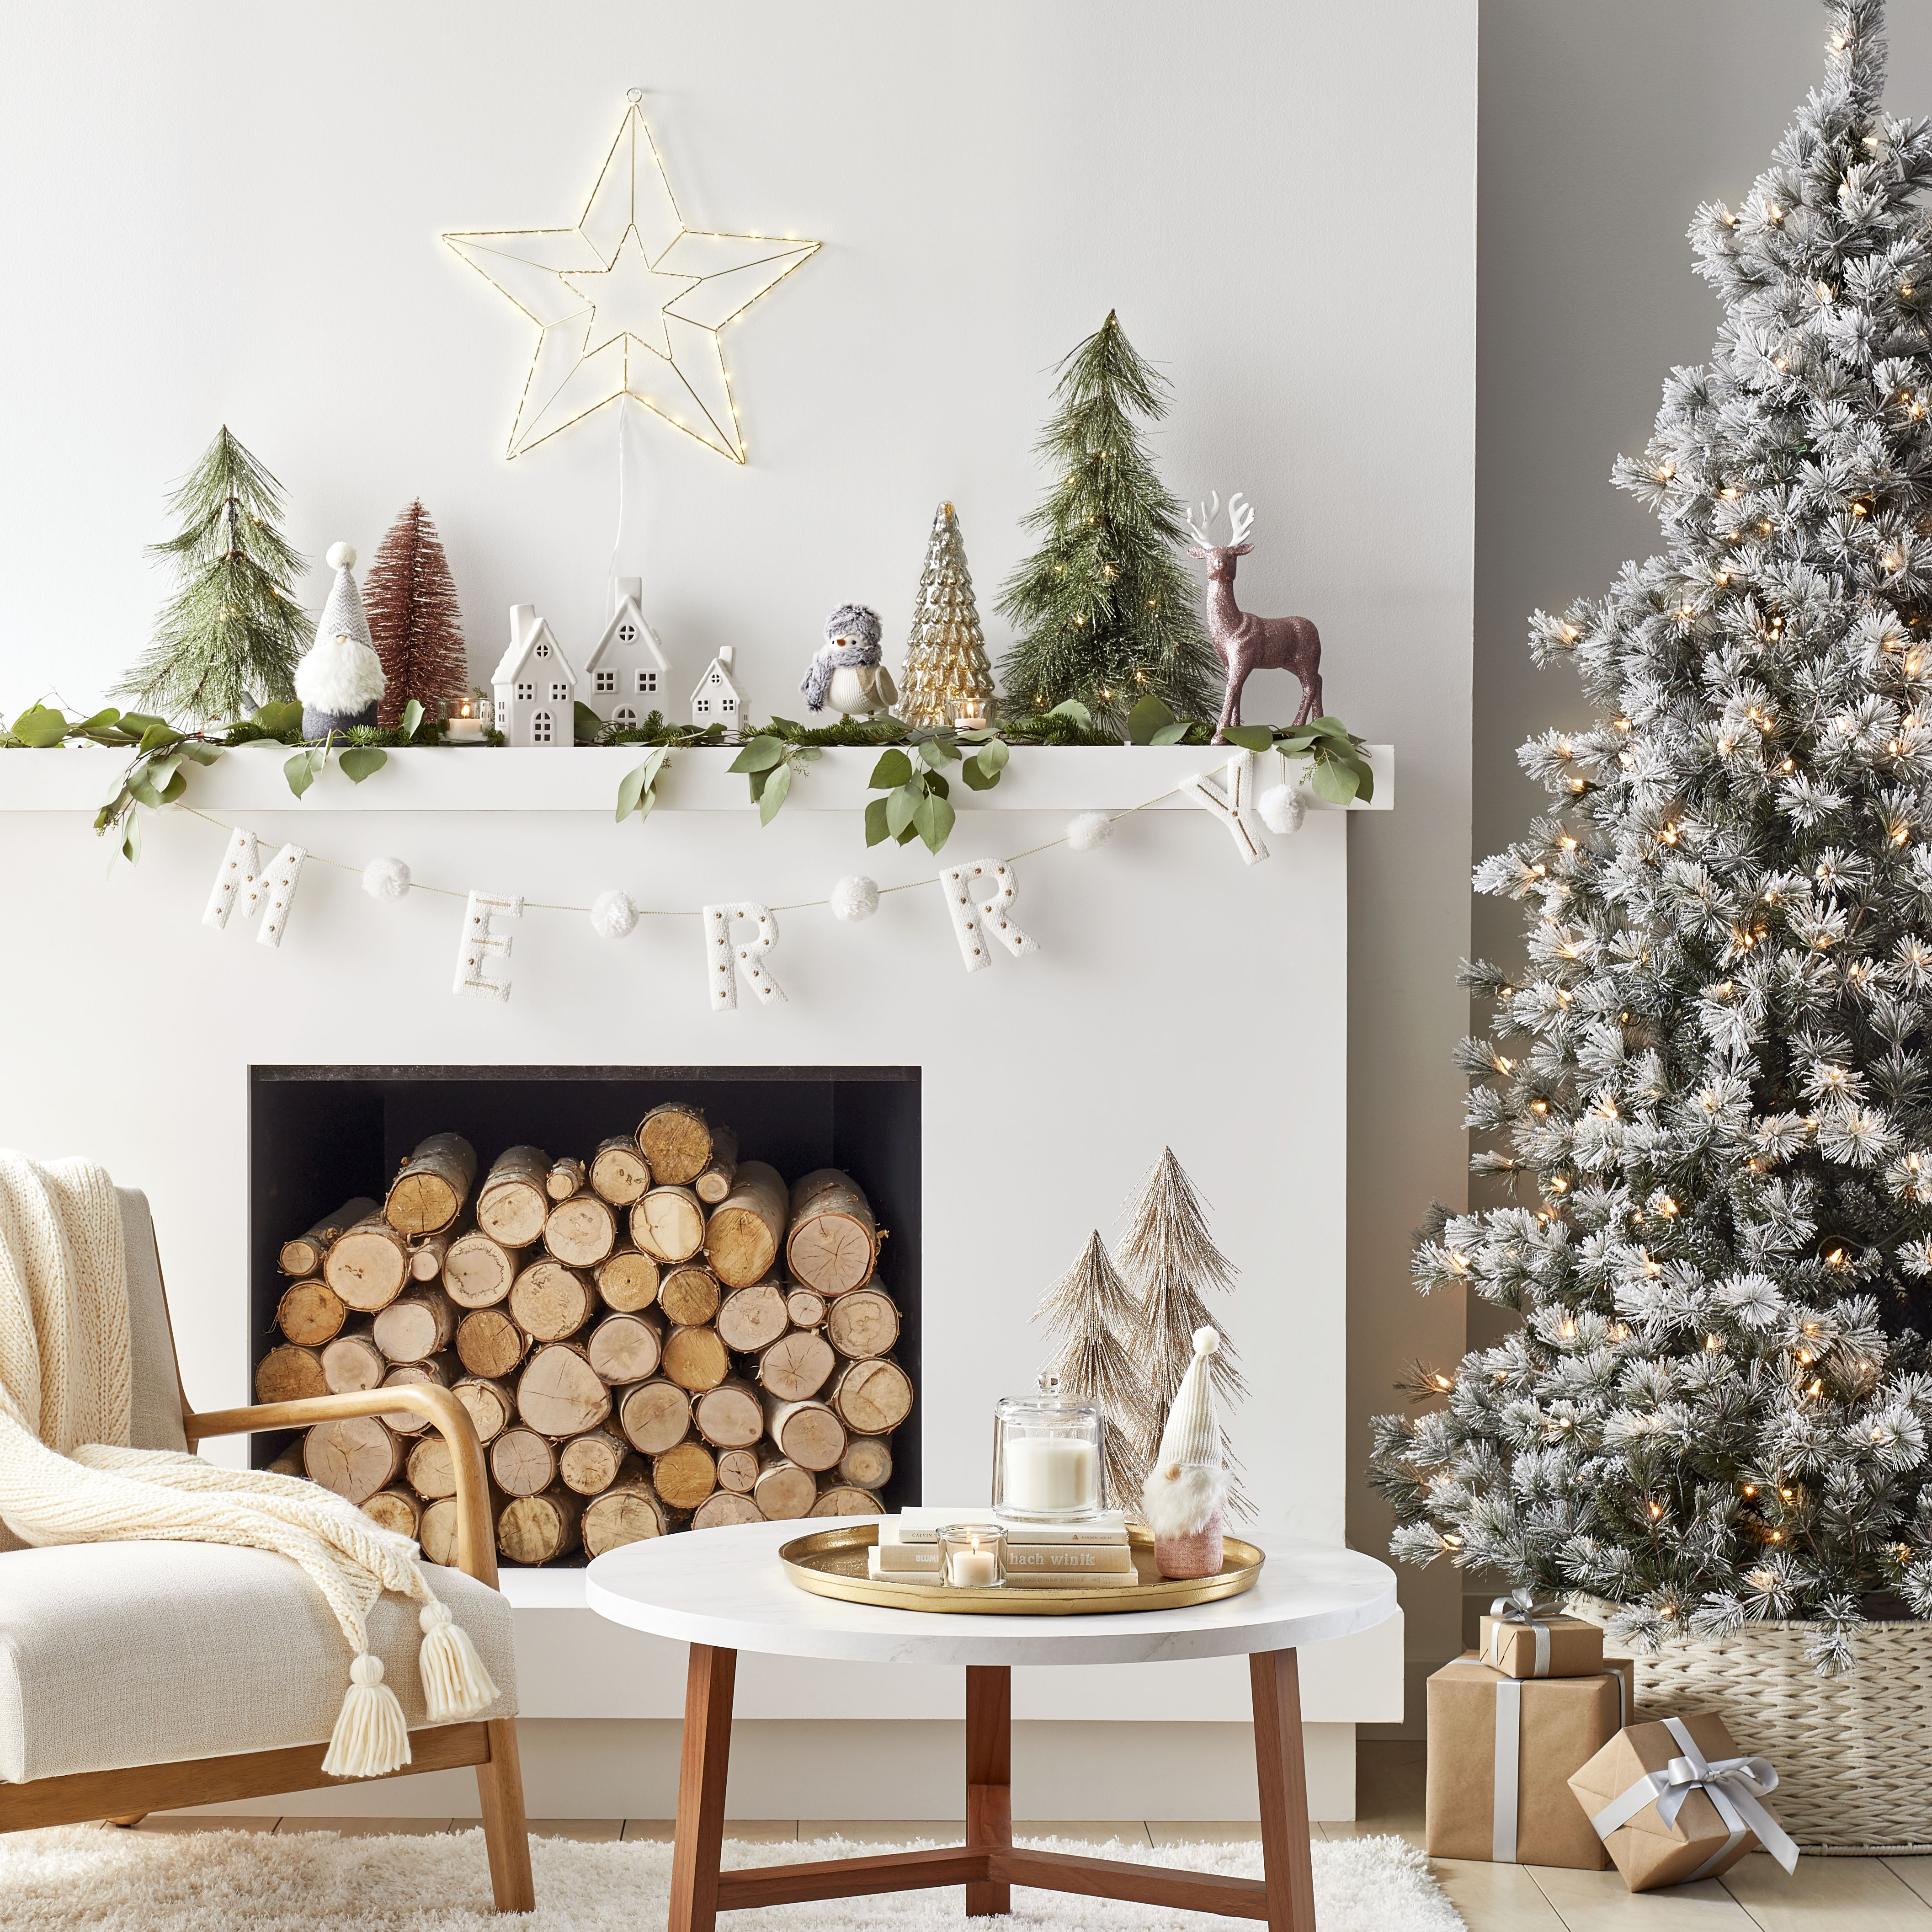 Target Home Holiday Collection Favorite Picks - Sunset